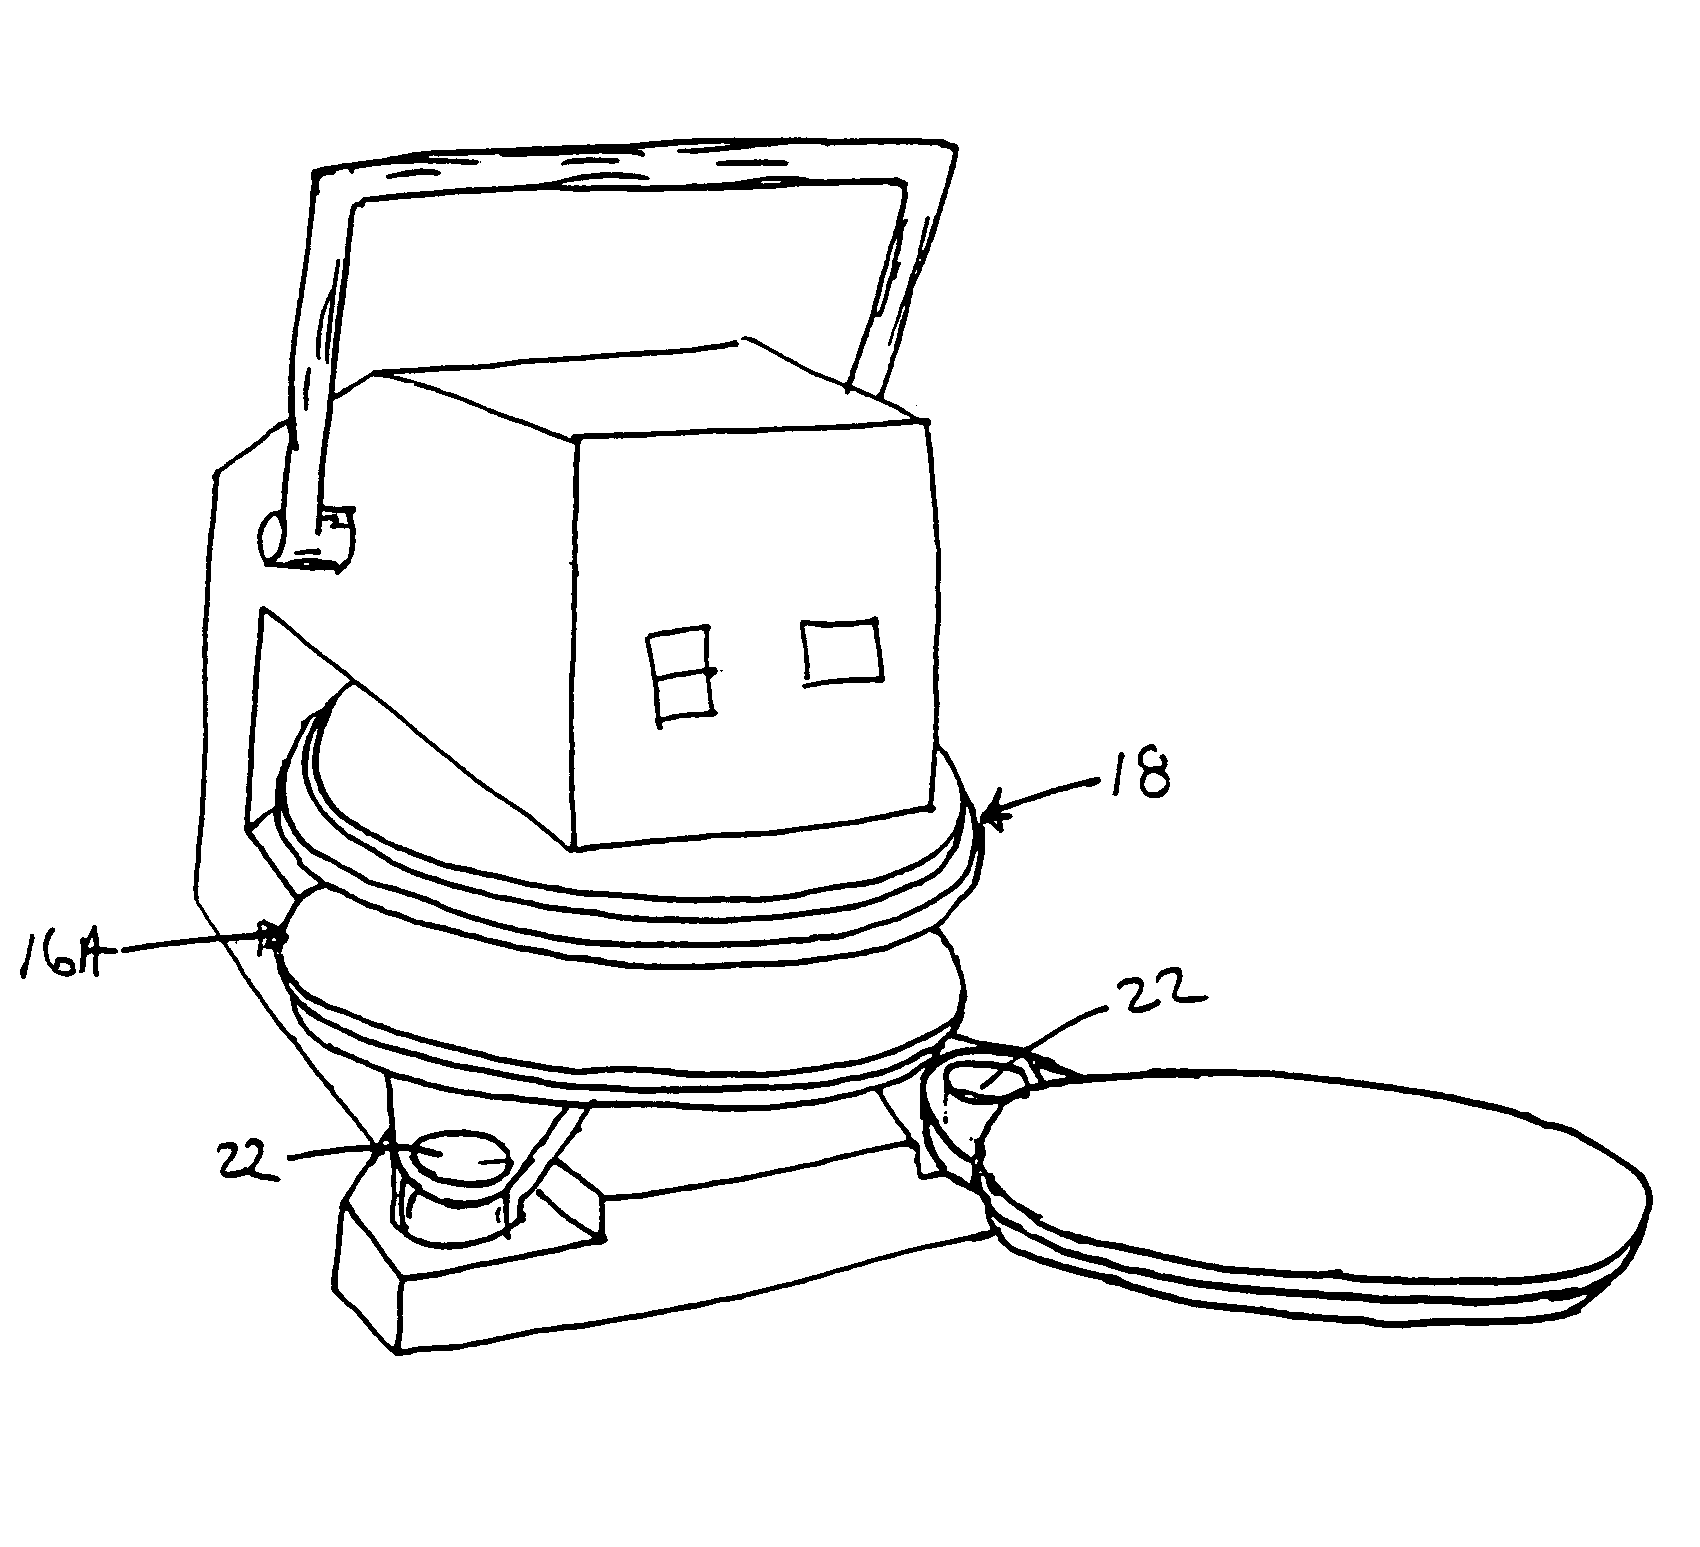 Dough press with dual lower platens